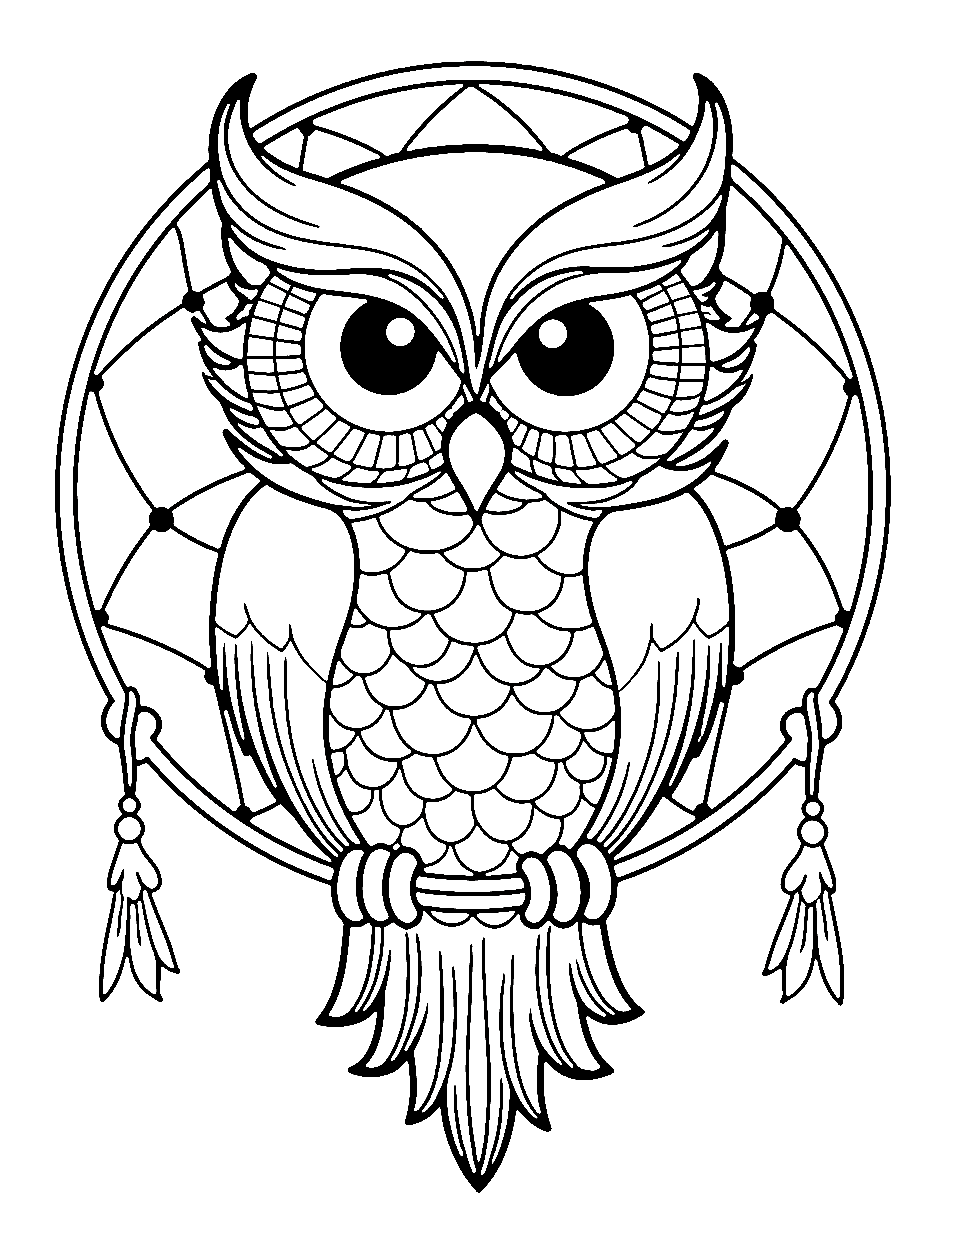 Dream Catcher with Owl Coloring Page - An owl perched on a beautifully patterned dream catcher.